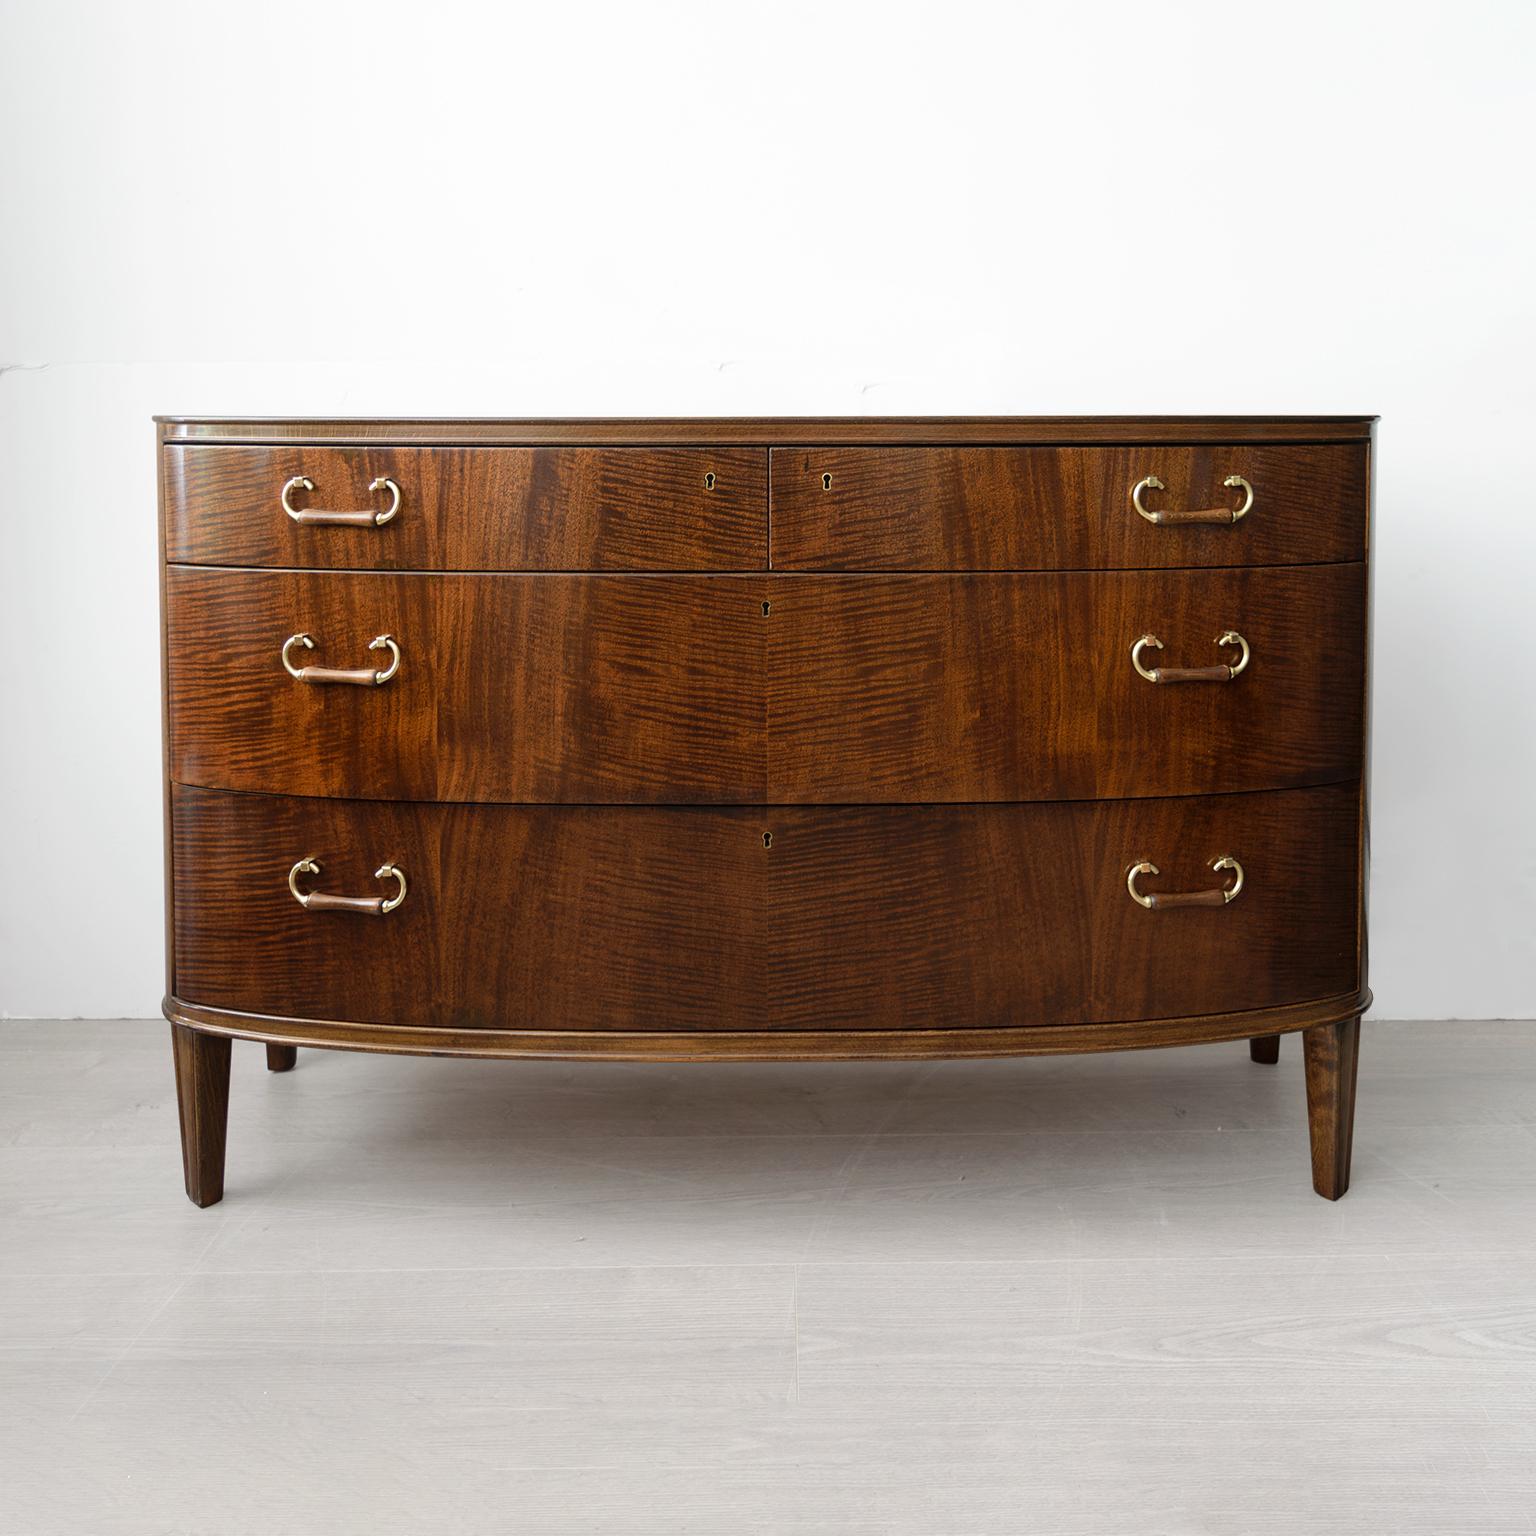 Axel Larsson designed “Rosita” series, stained sycamore chest with 4 drawers detailed with carved wood and polished brass handles. Made for SMF Bodafors, Sweden, circa 1940’s. Fully restored condition. 

Measures: Height: 28”, width: 43.25” depth: